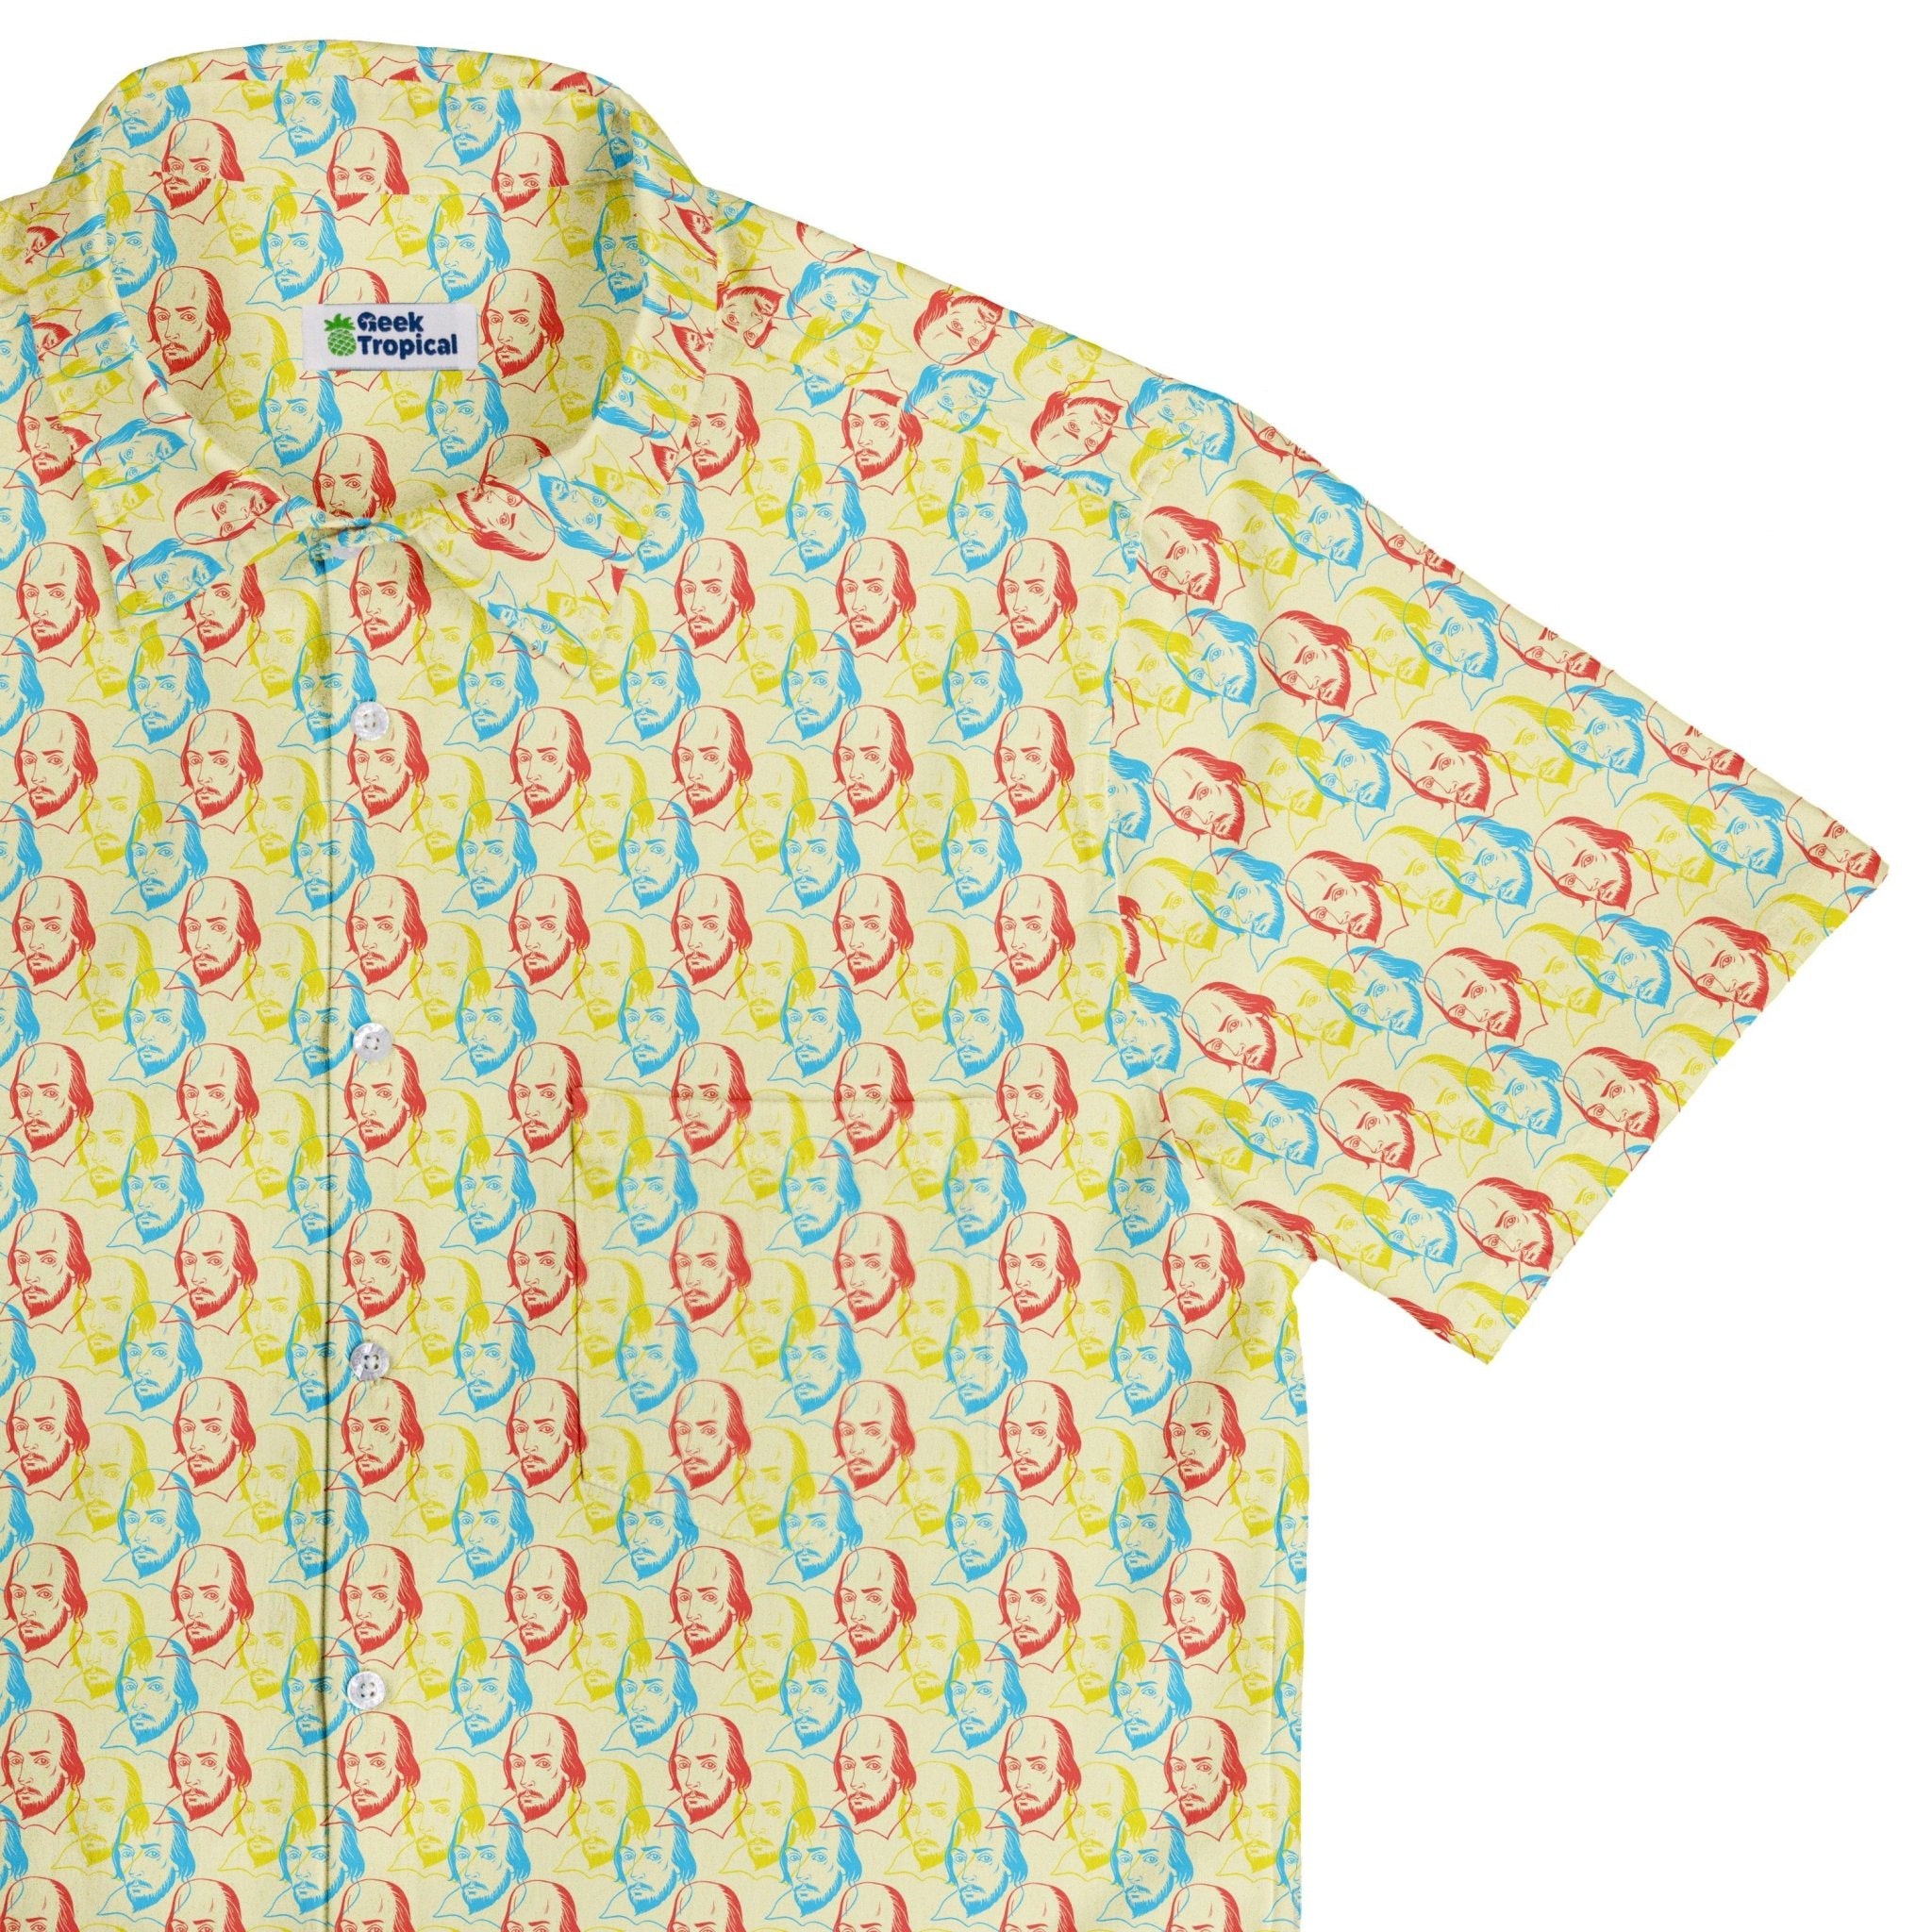 Shakespeare Primary Colors Button Up Shirt - adult sizing - Book Prints - Simple Patterns